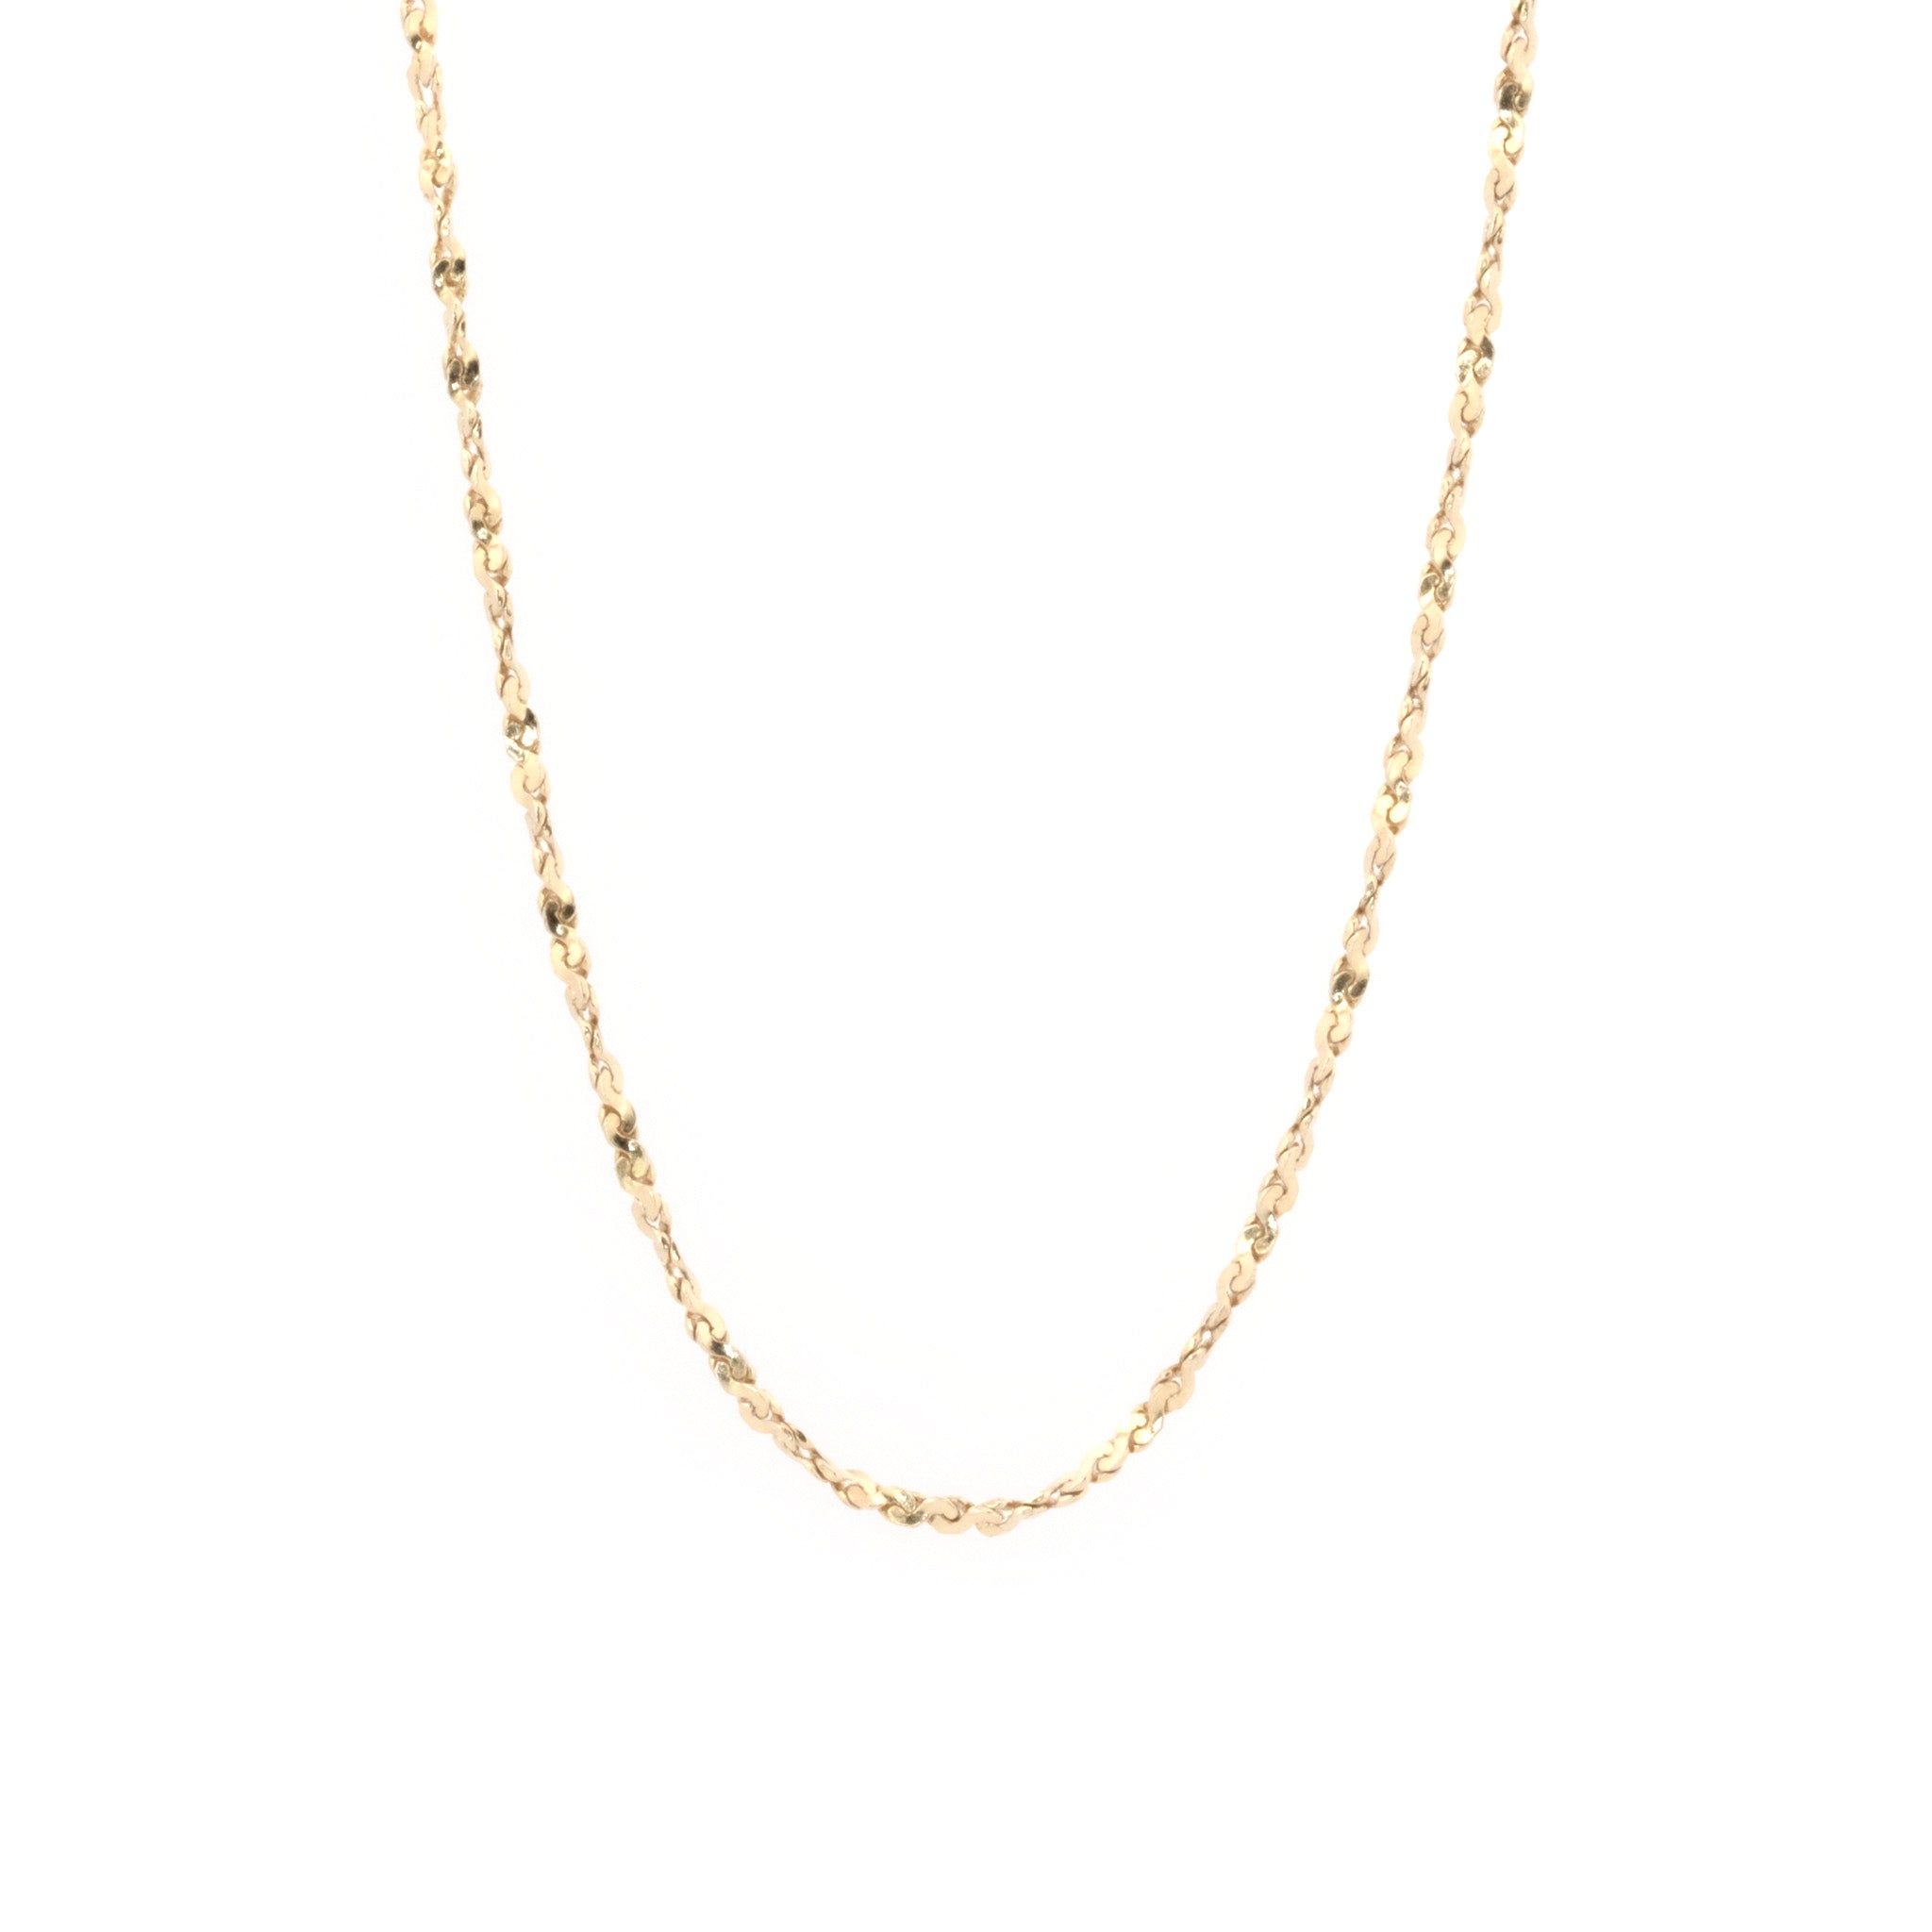 An Aiden Jae Starshine Chain Necklace with beads on a white background.